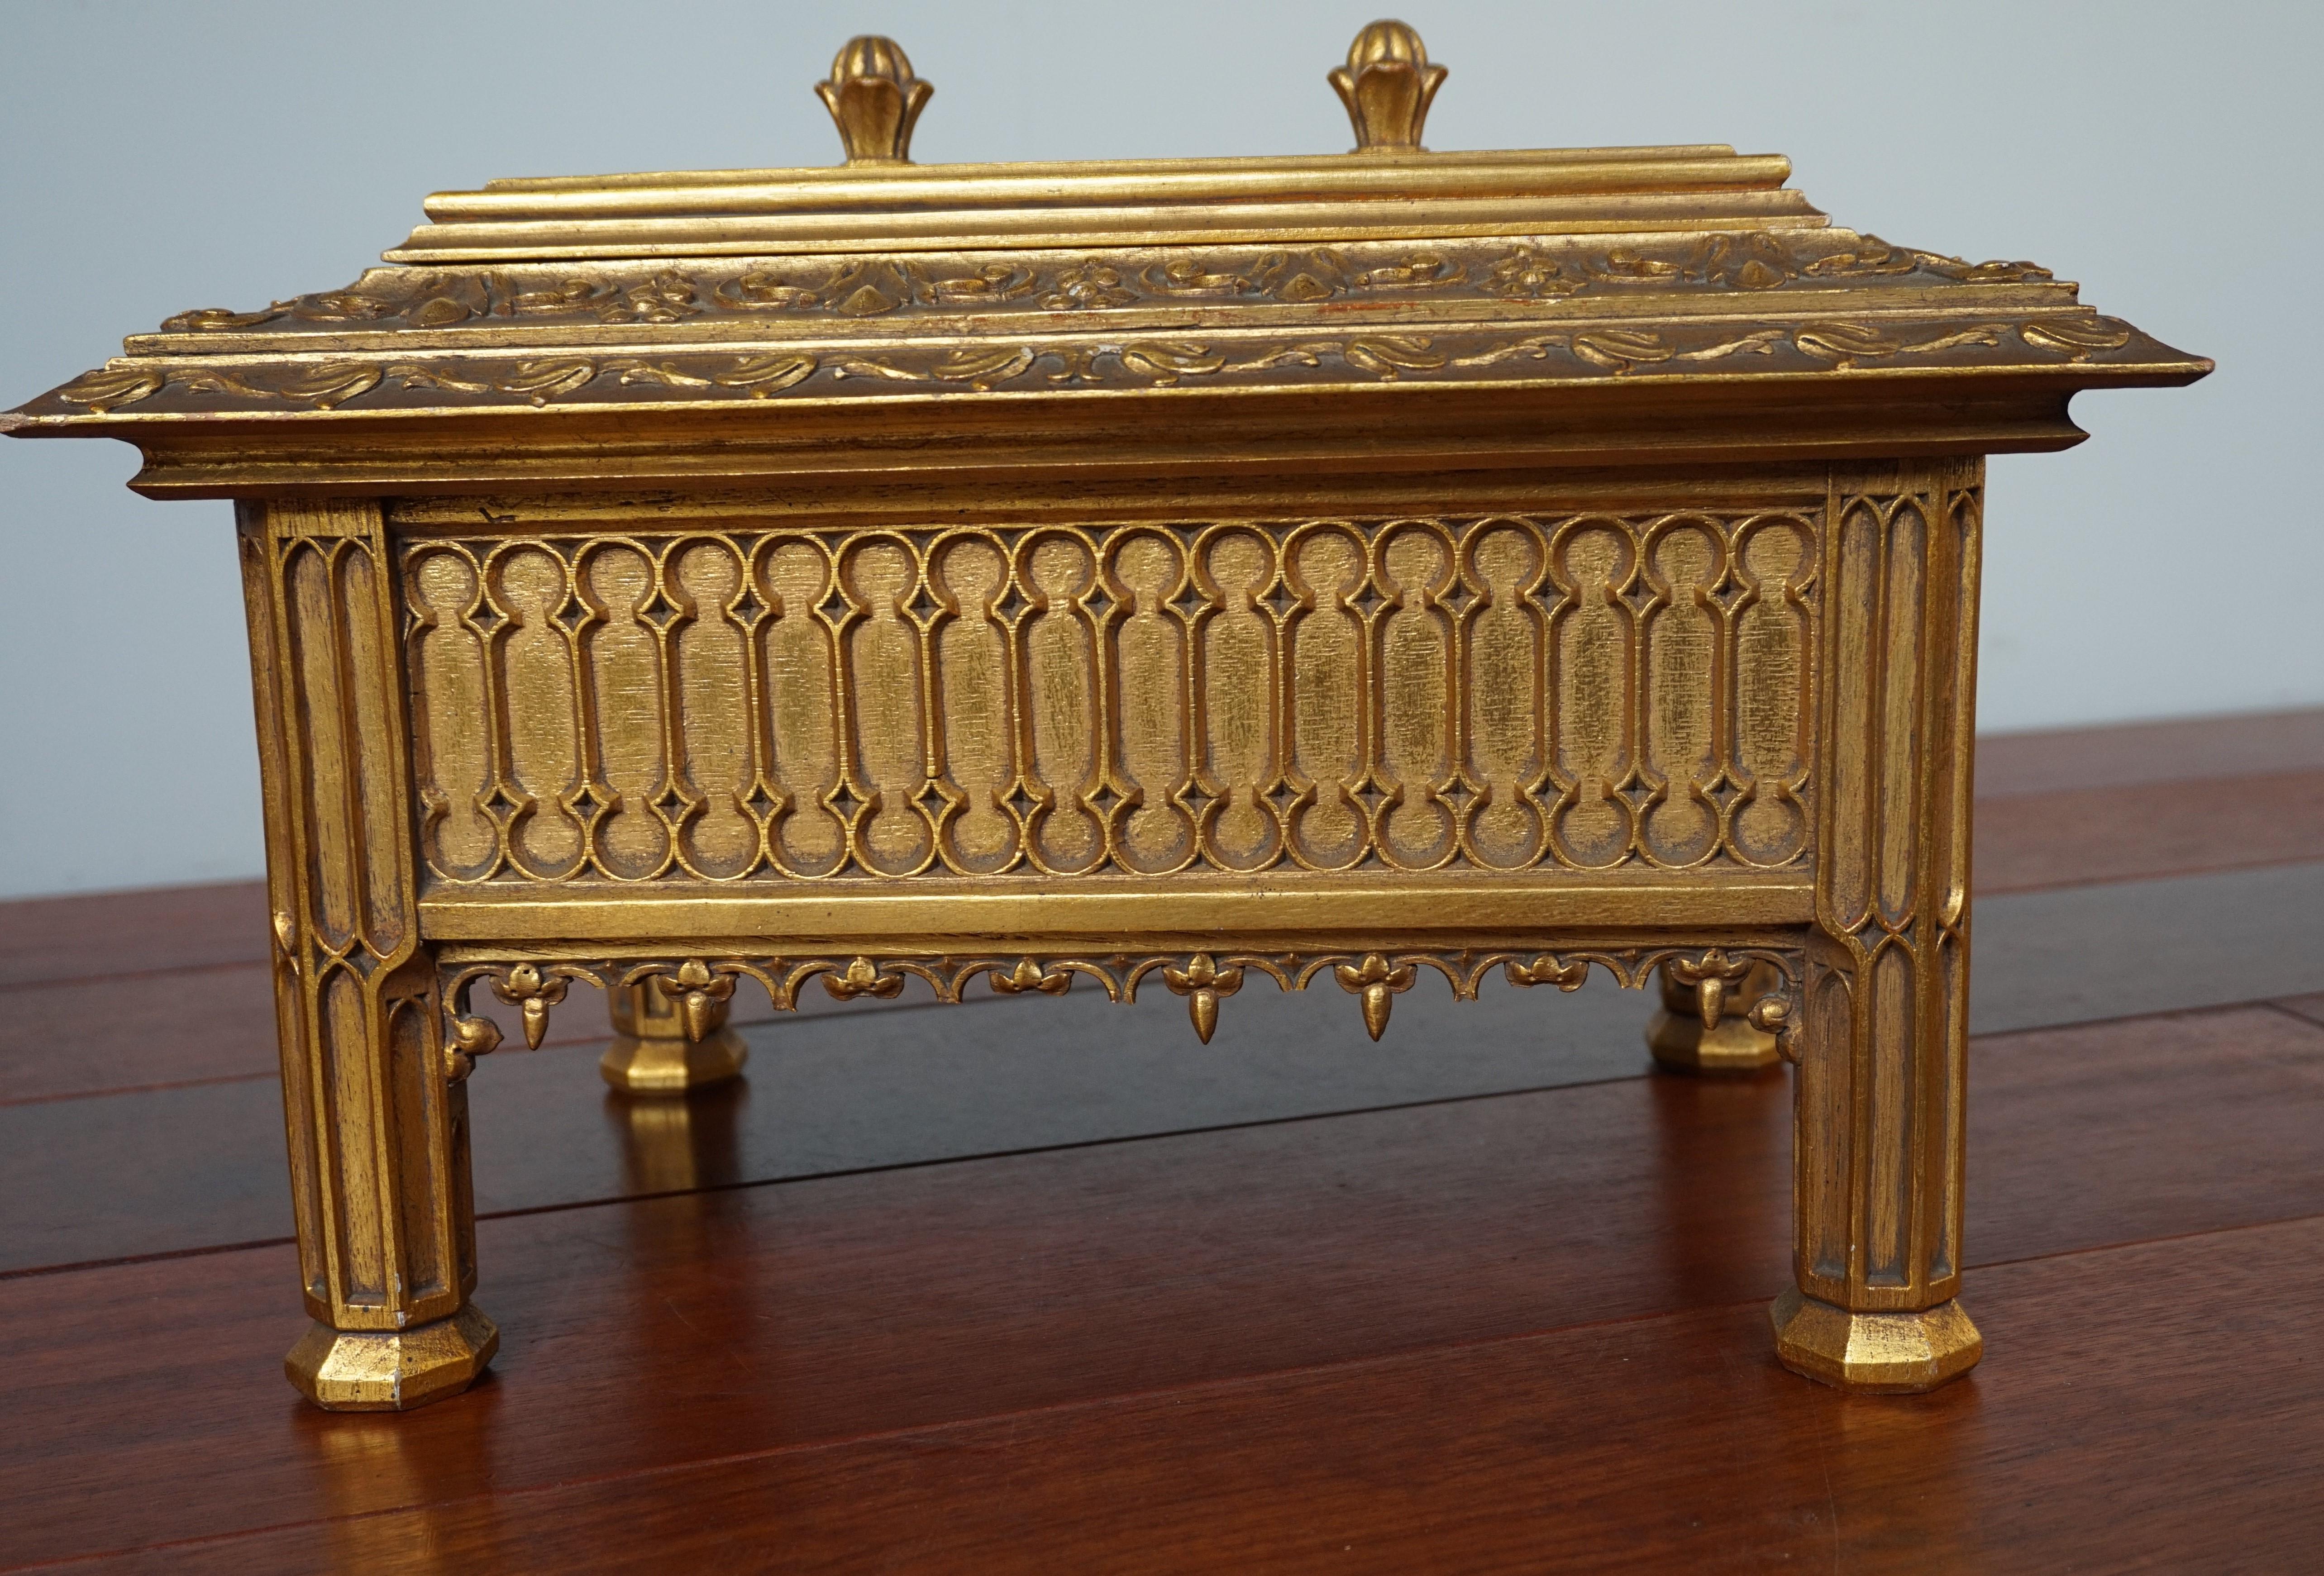 Unique Hand Carved and Gilt Oak Gothic Revival Church Reliquary Casket with Lid 2